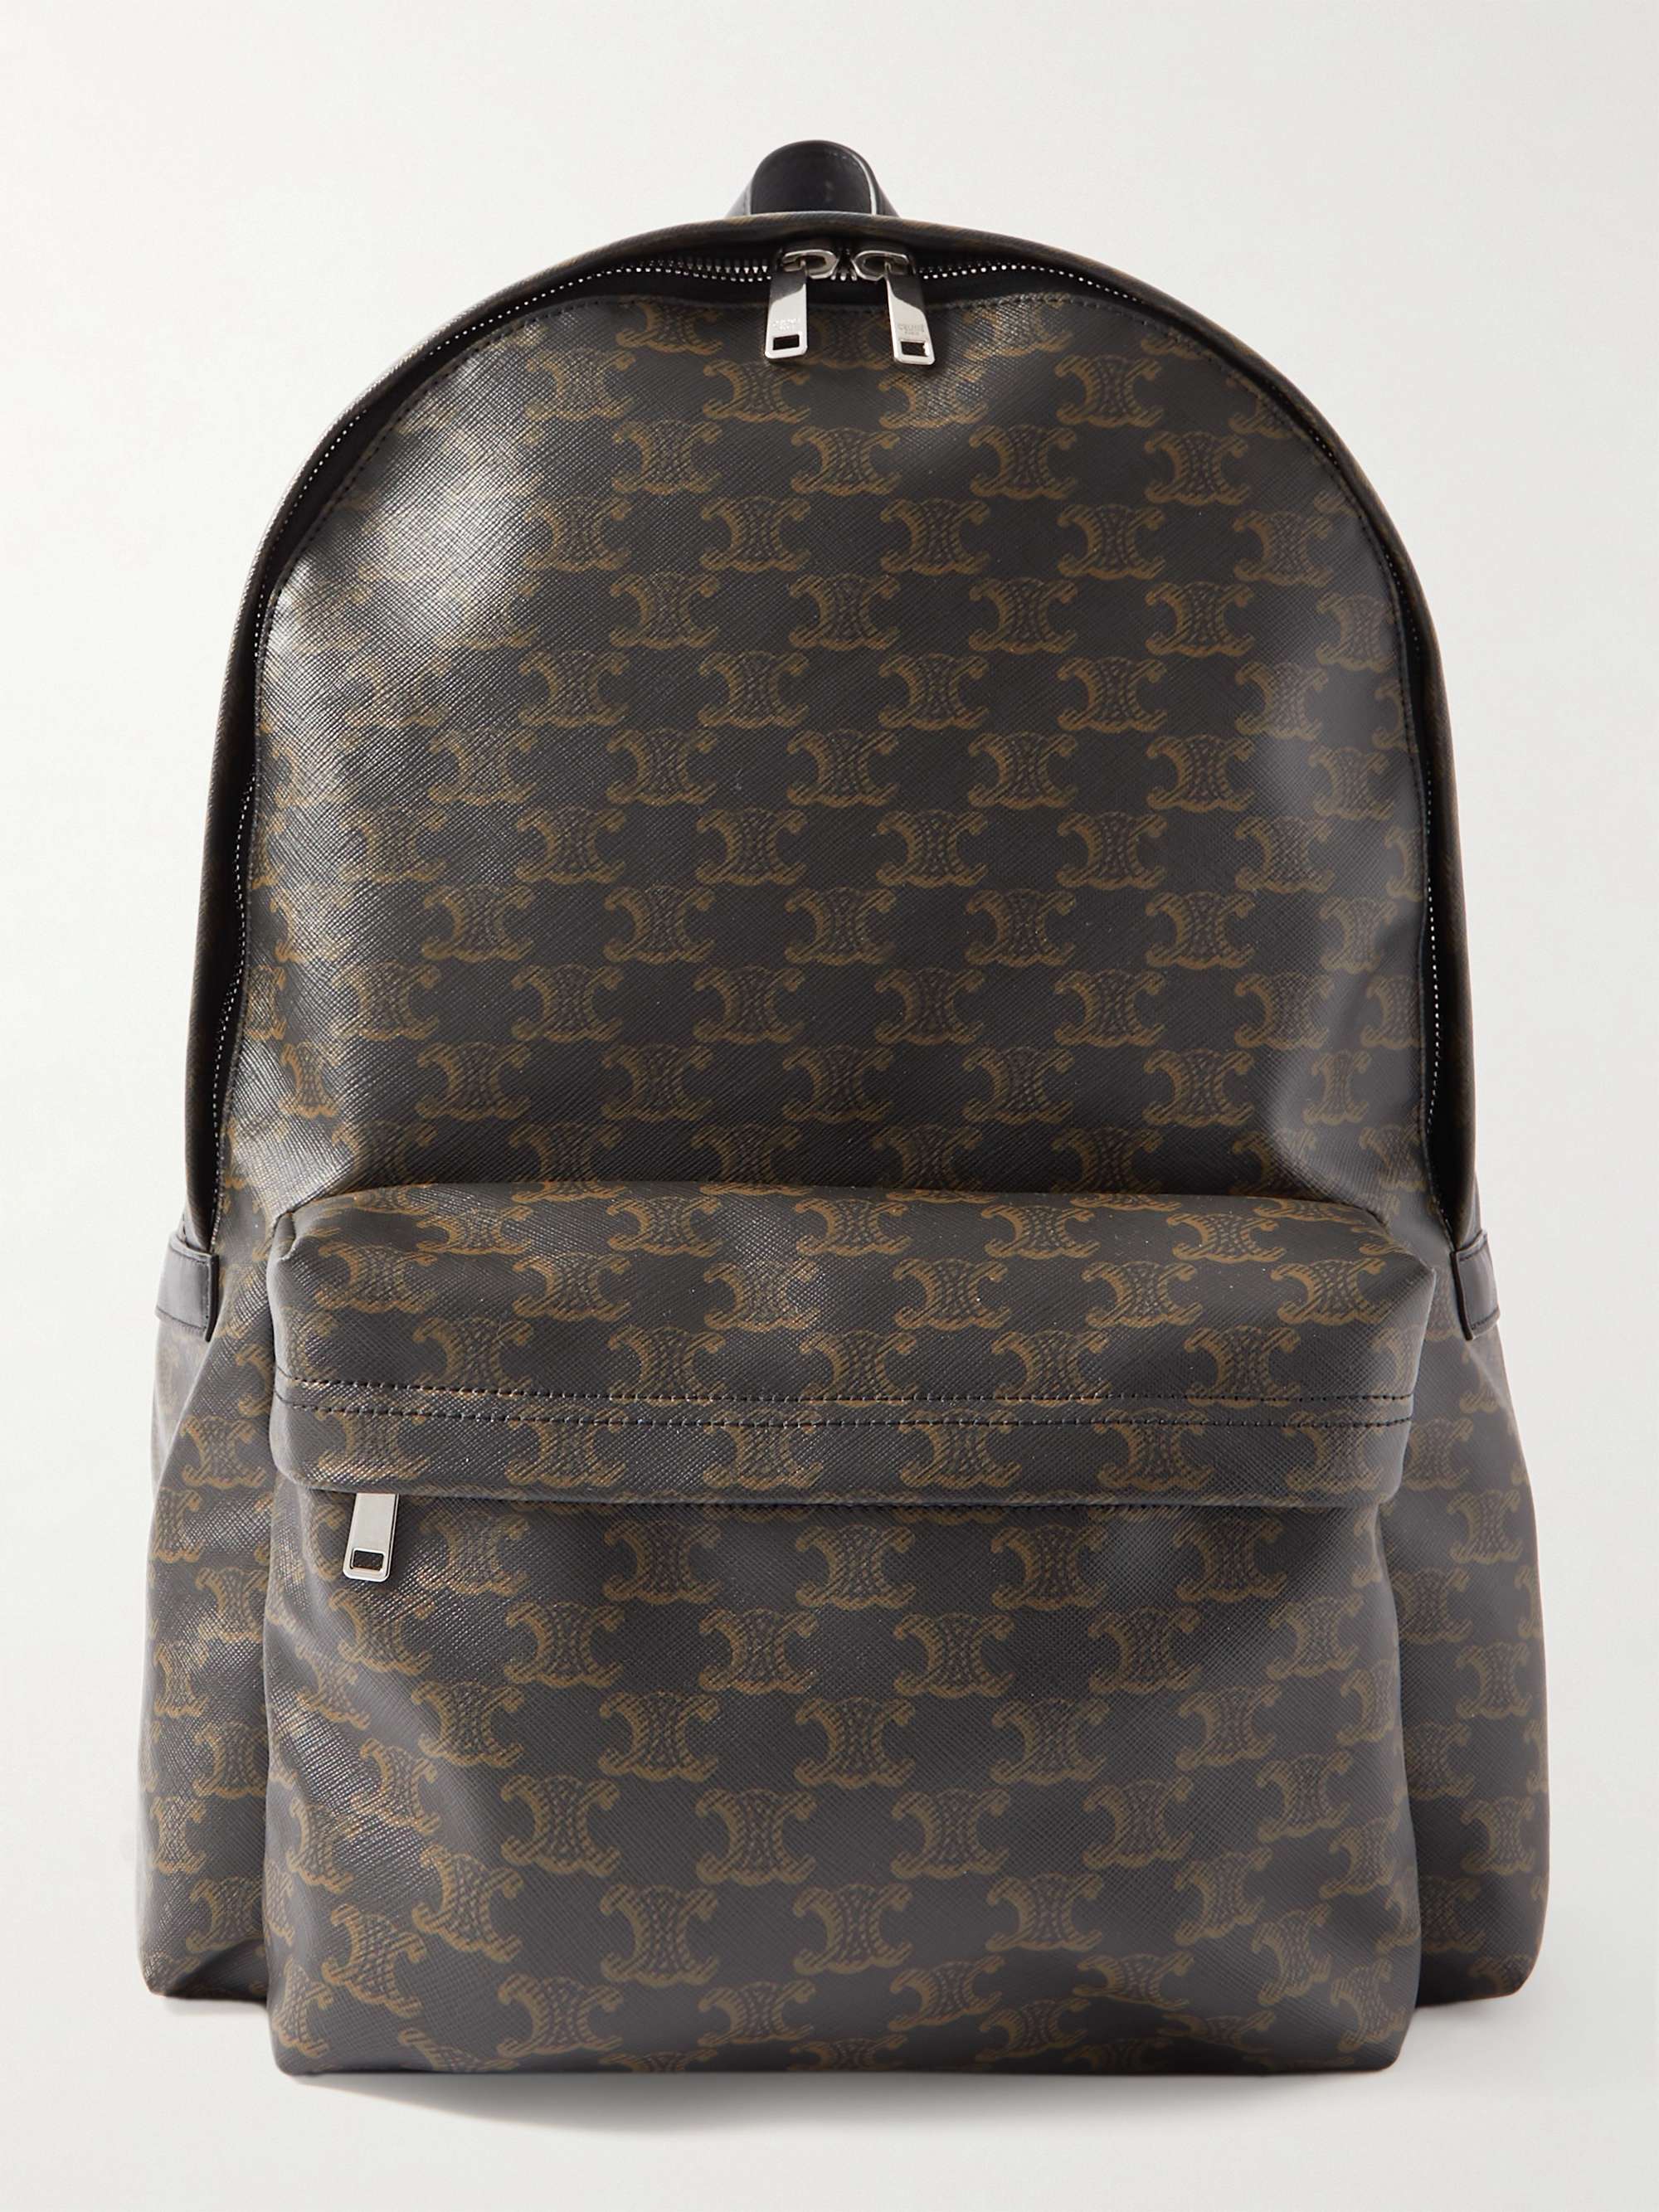 louis vuitton backpack outfit